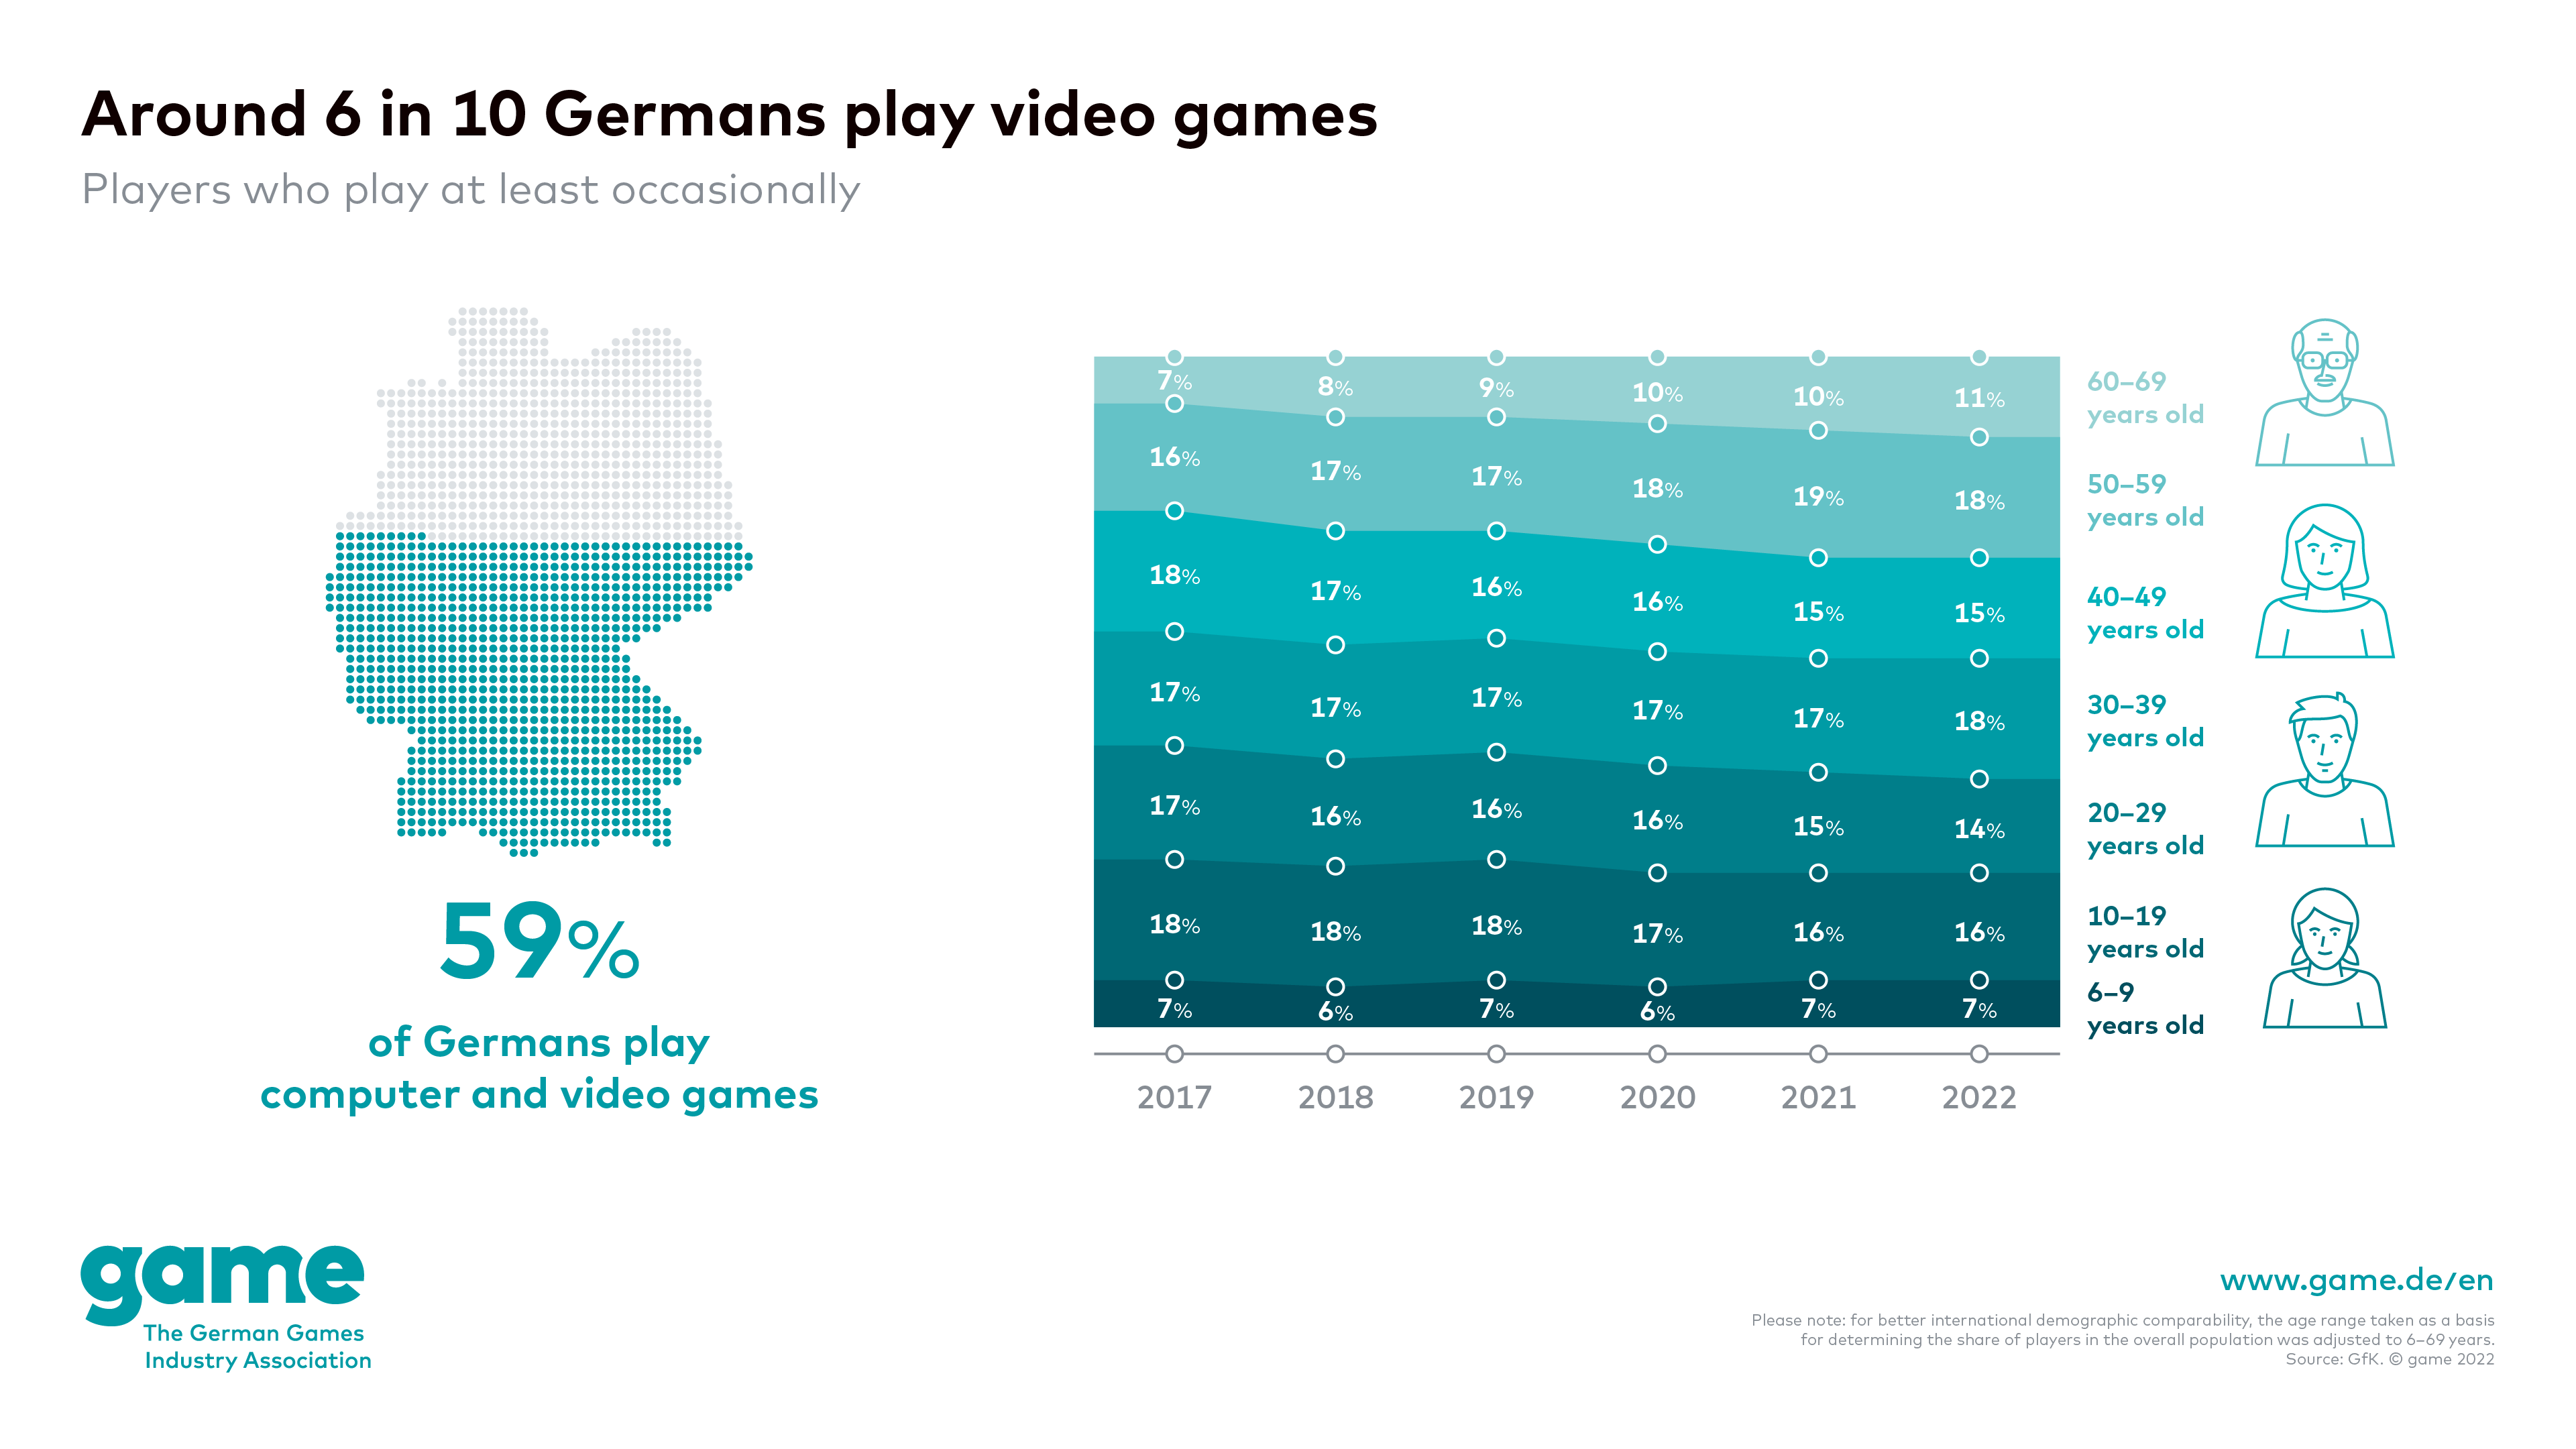 Around 6 in 10 Germans play video games